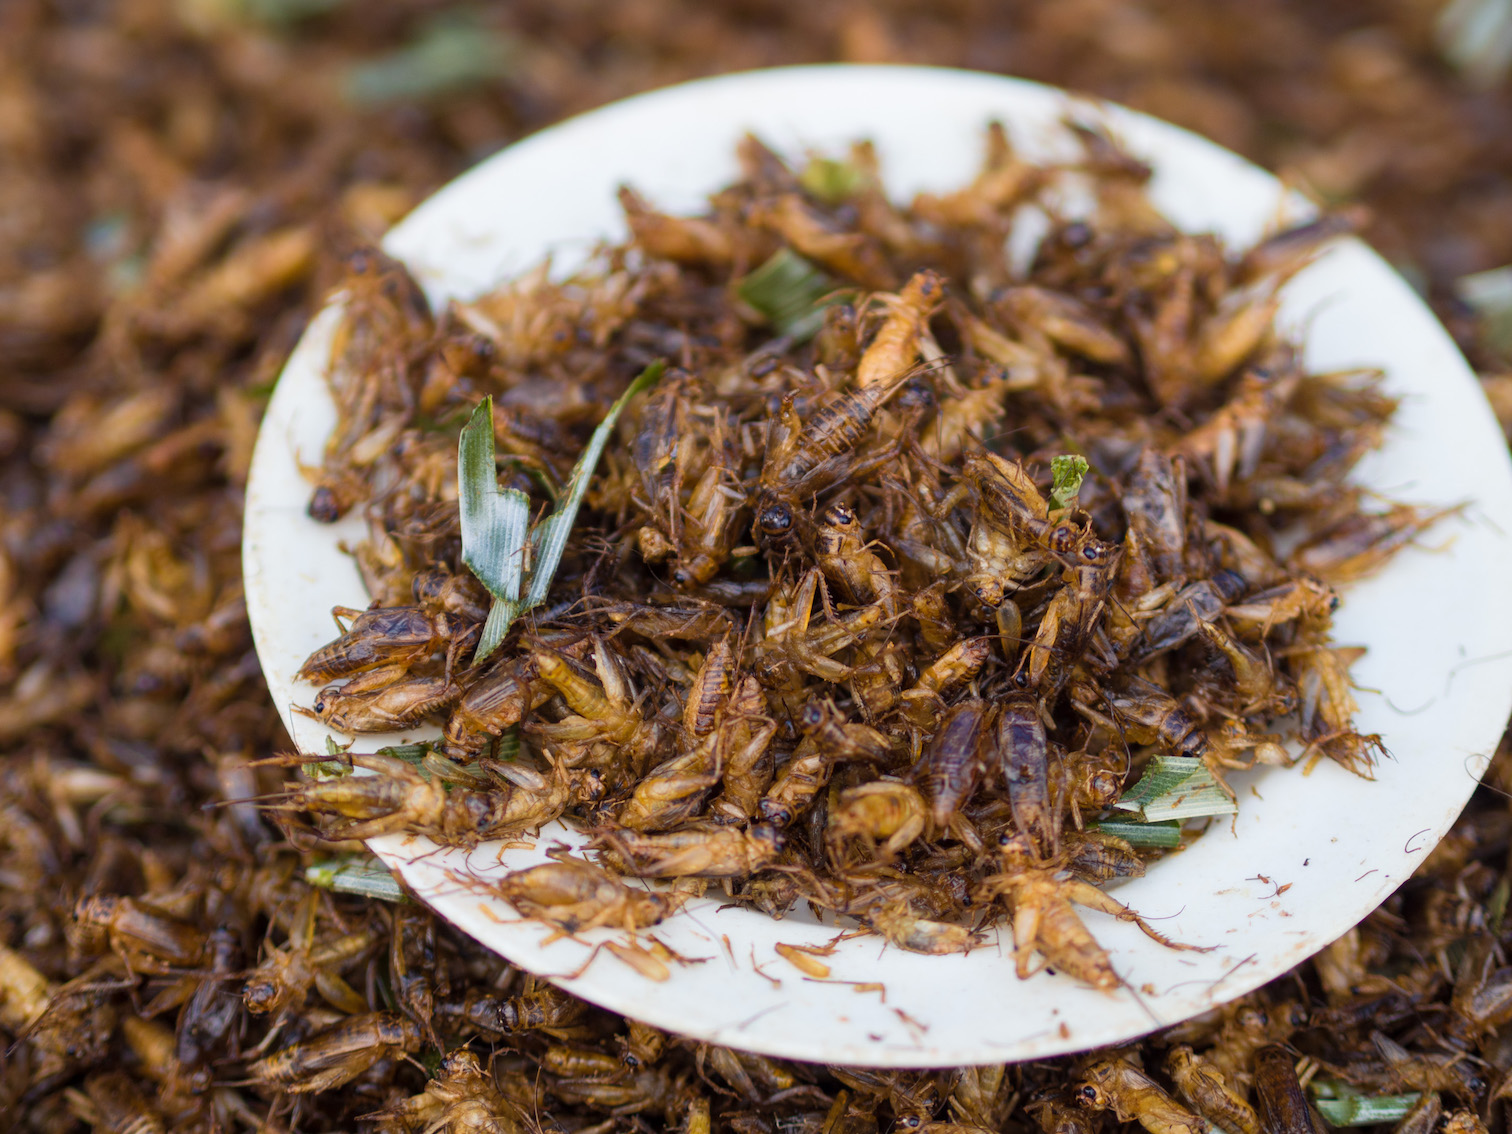 Image: Footage of cricket farm in Canada highlights globalist push to replace beef with bugs